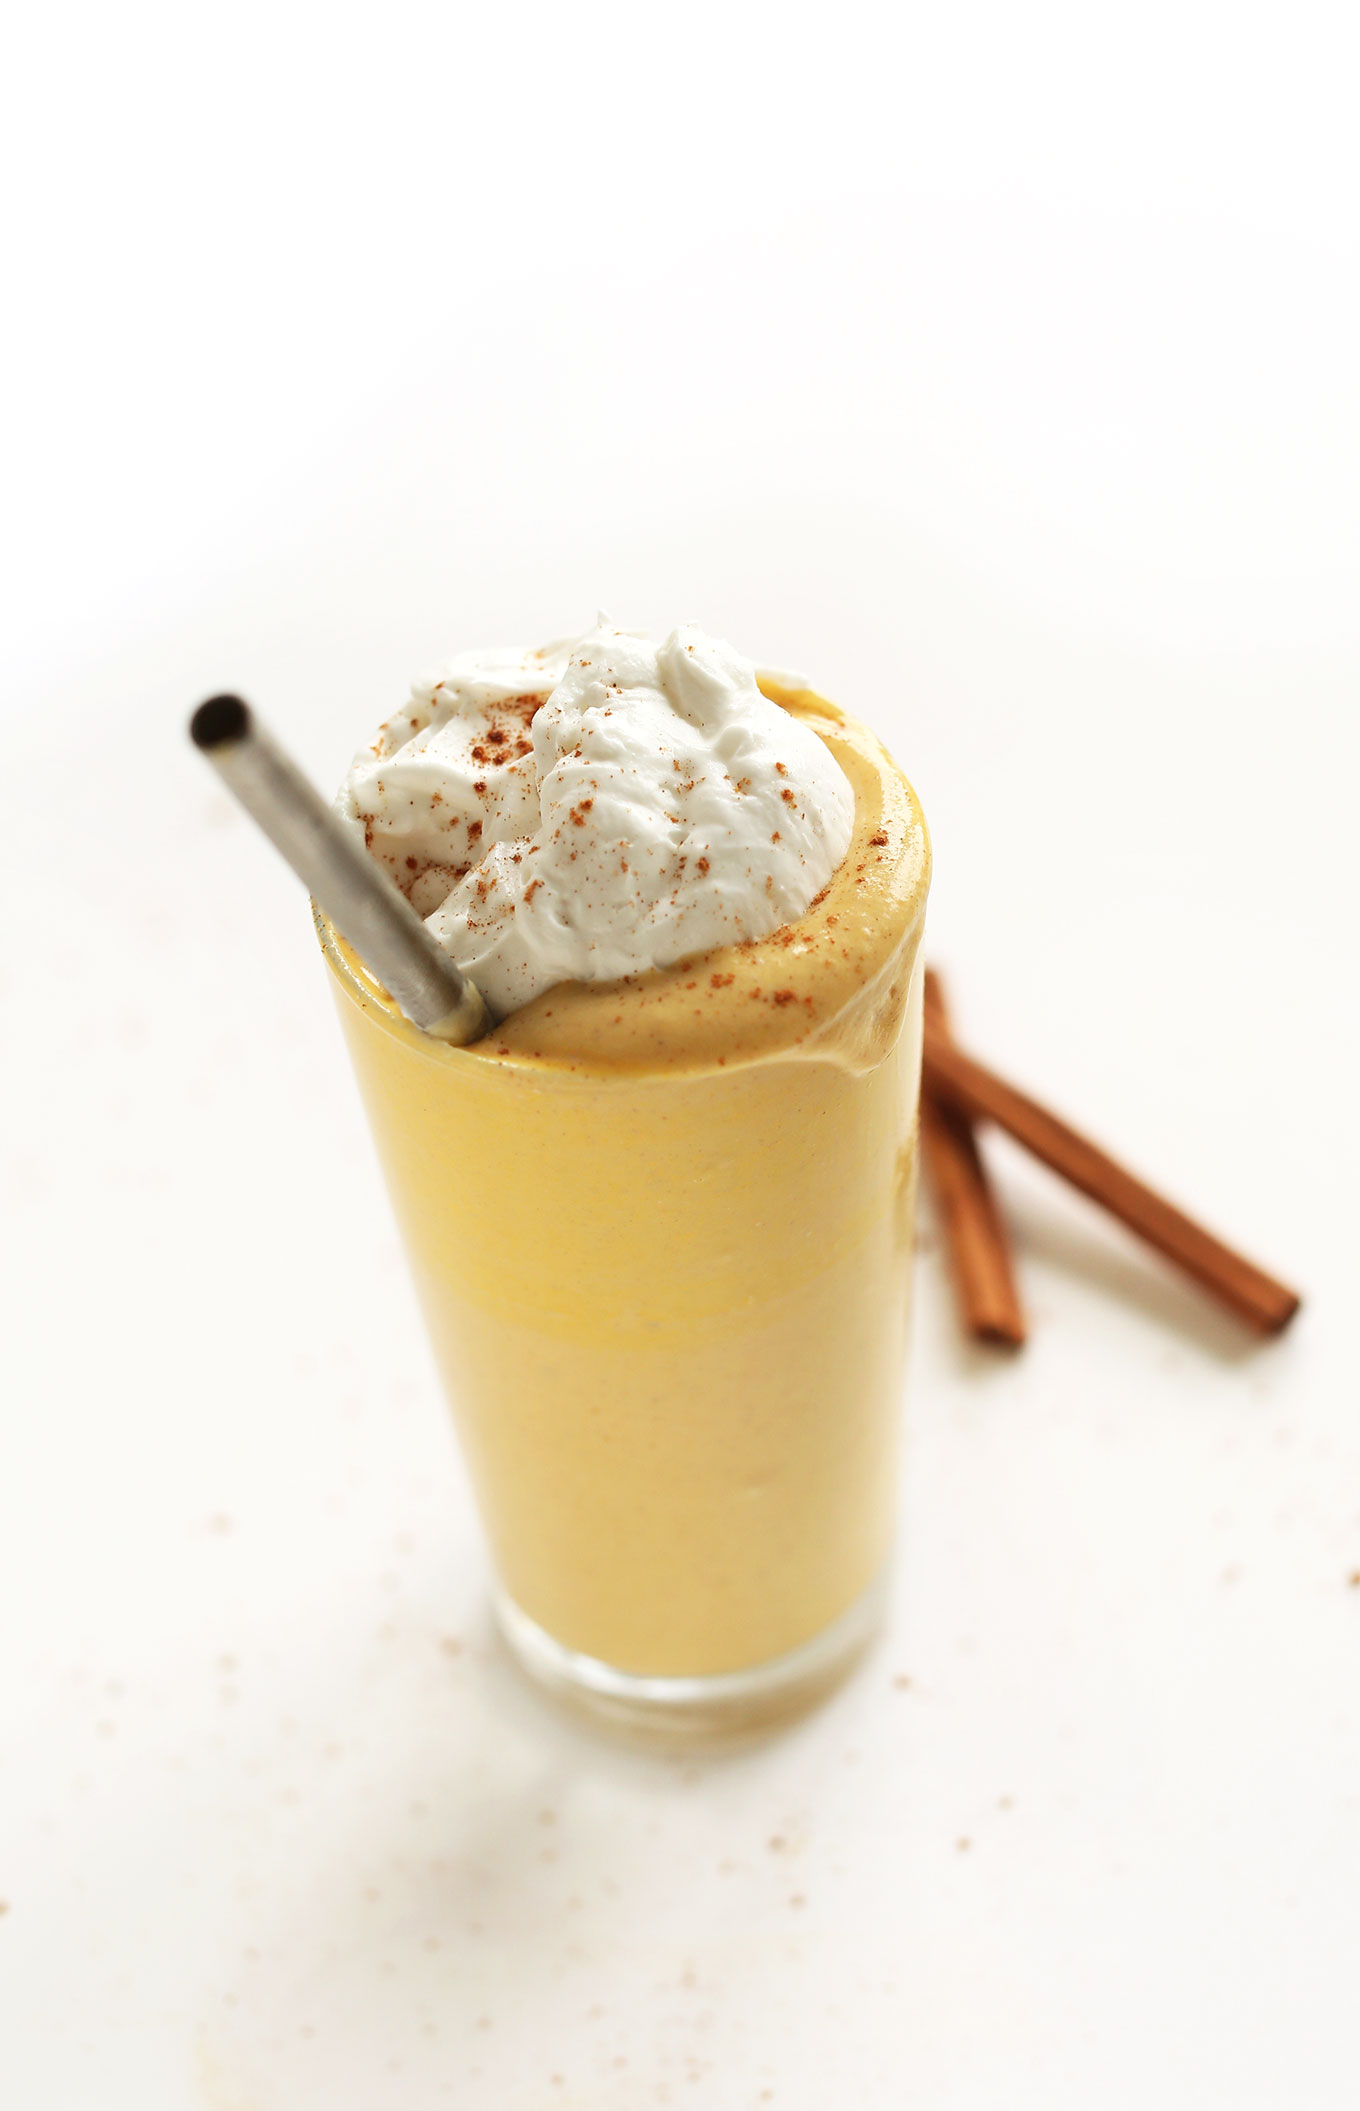 Tall glass of Boozy Pumpkin Milkshake topped with coconut whip and a dash of cinnamon